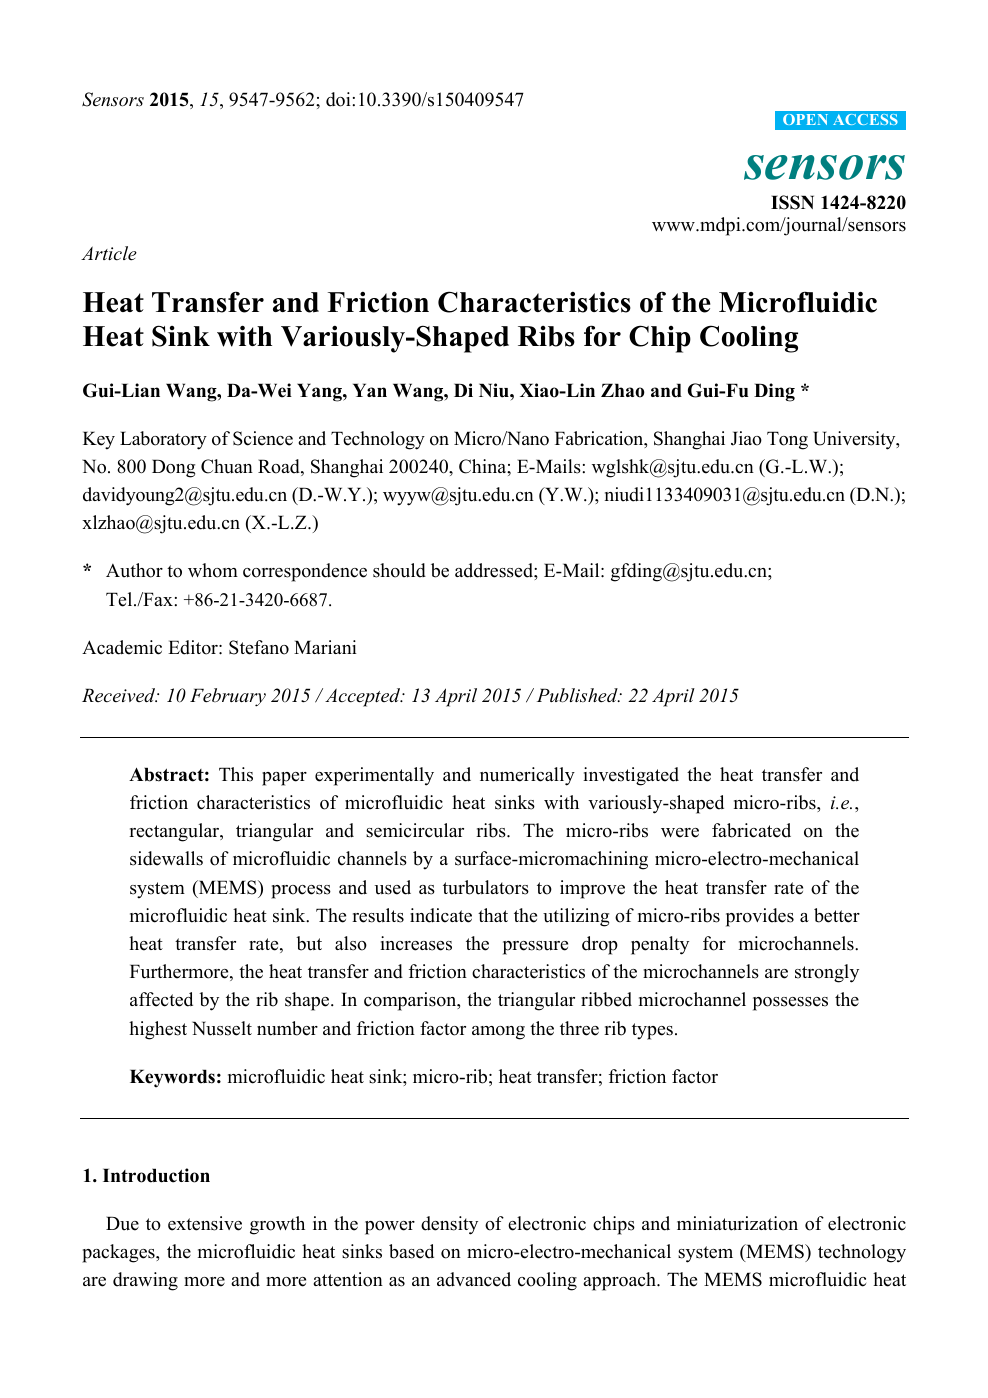 Heat Transfer And Friction Characteristics Of The Microfluidic Heat Sink With Variously Shaped Ribs For Chip Cooling Topic Of Research Paper In Mechanical Engineering Download Scholarly Article Pdf And Read For Free